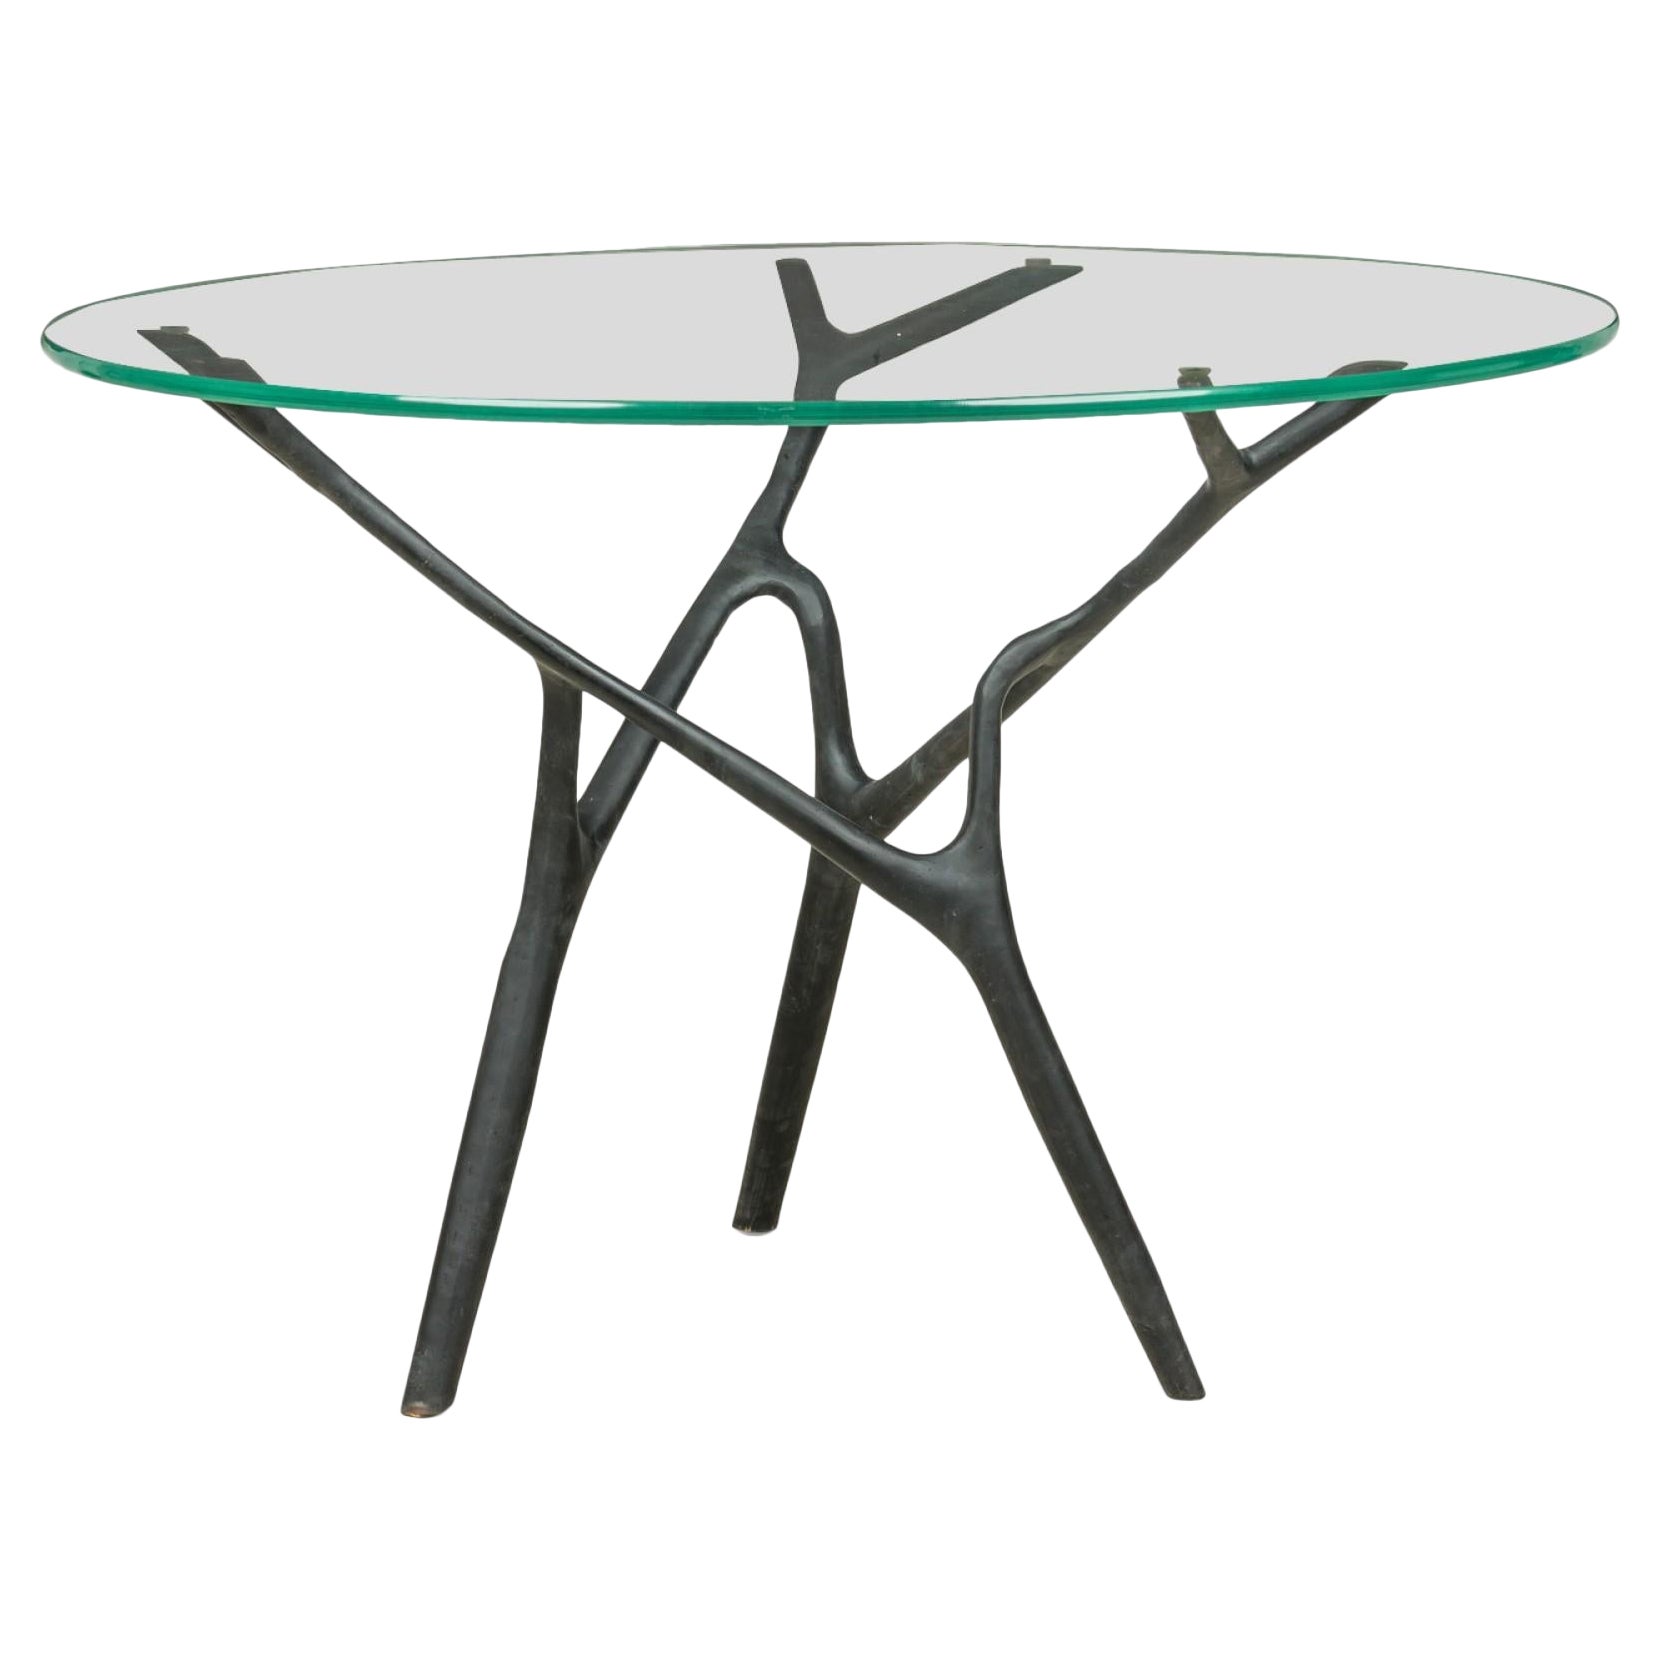 "Branco" Bronze and Glass Circular Organic Branch Form Dining Table For Sale